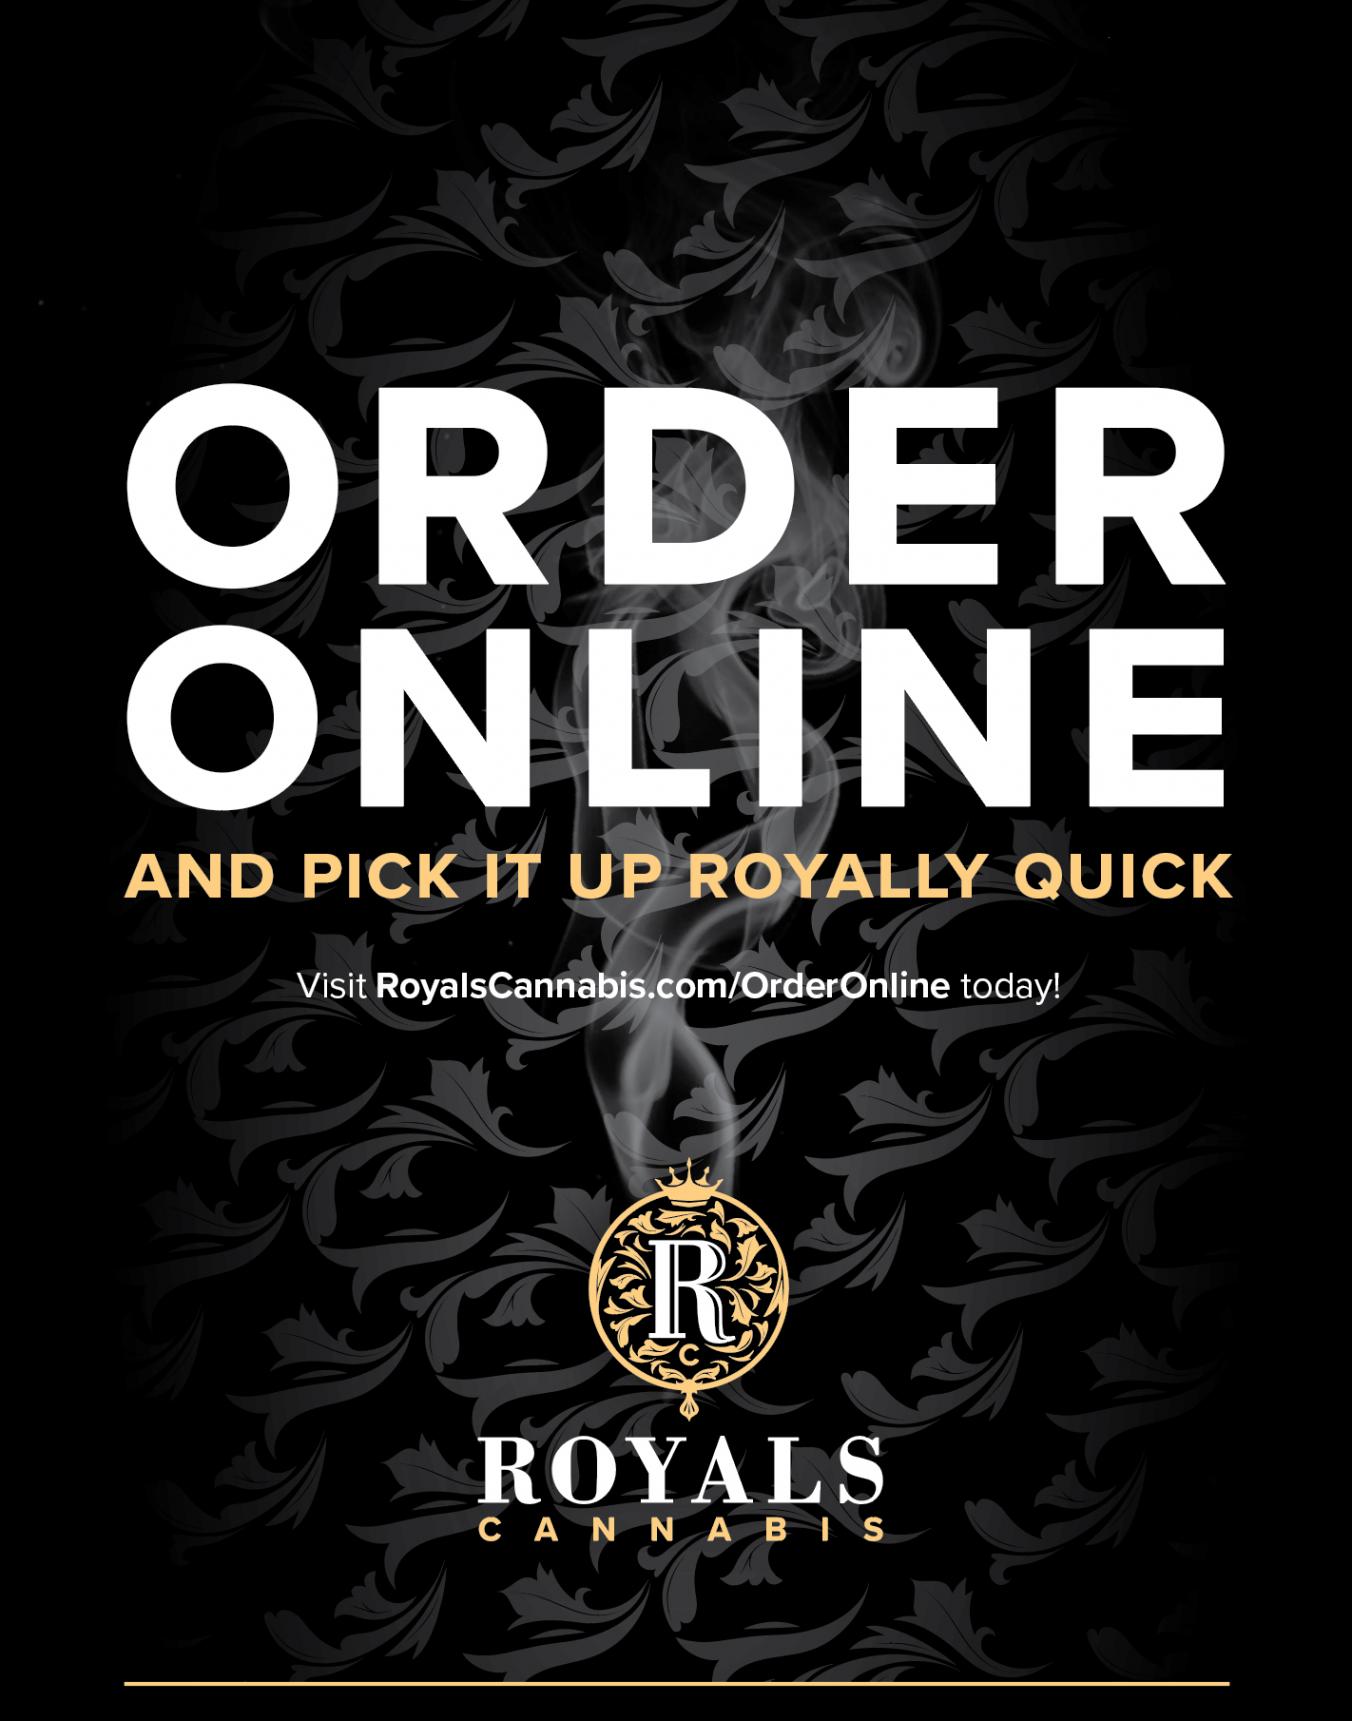 Order Online and Save Time!